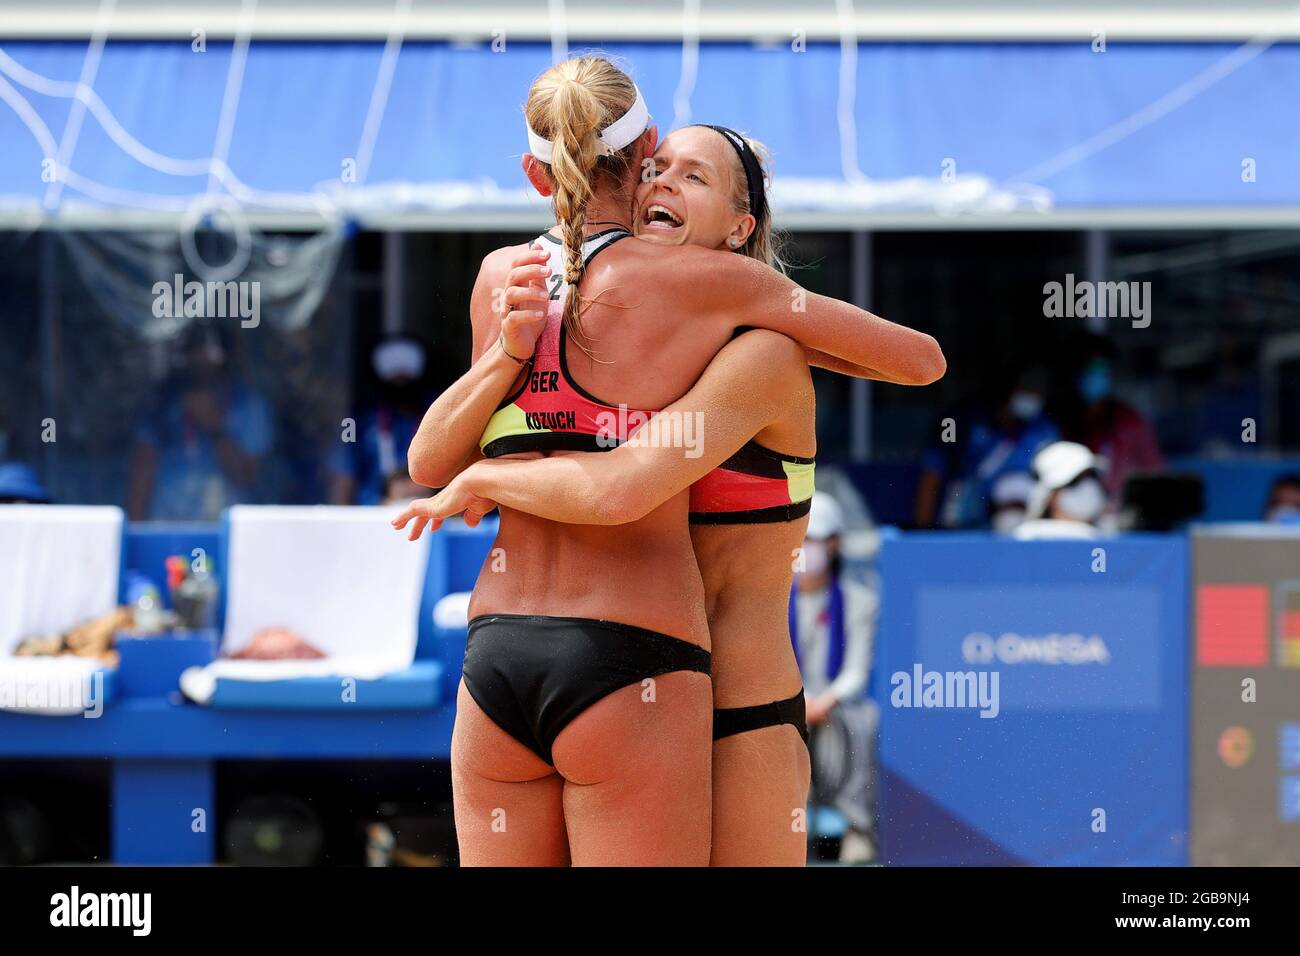 Tokyo, Japan, 3 August, 2021. Laura Ludwig of Team Germany and Margareta Kozuch of Team Germany celebrate a point during the Women's Beach Volleyball Quarterfinal match between Germany and USA on Day 11 of the Tokyo 2020 Olympic Games. Credit: Pete Dovgan/Speed Media/Alamy Live News Stock Photo